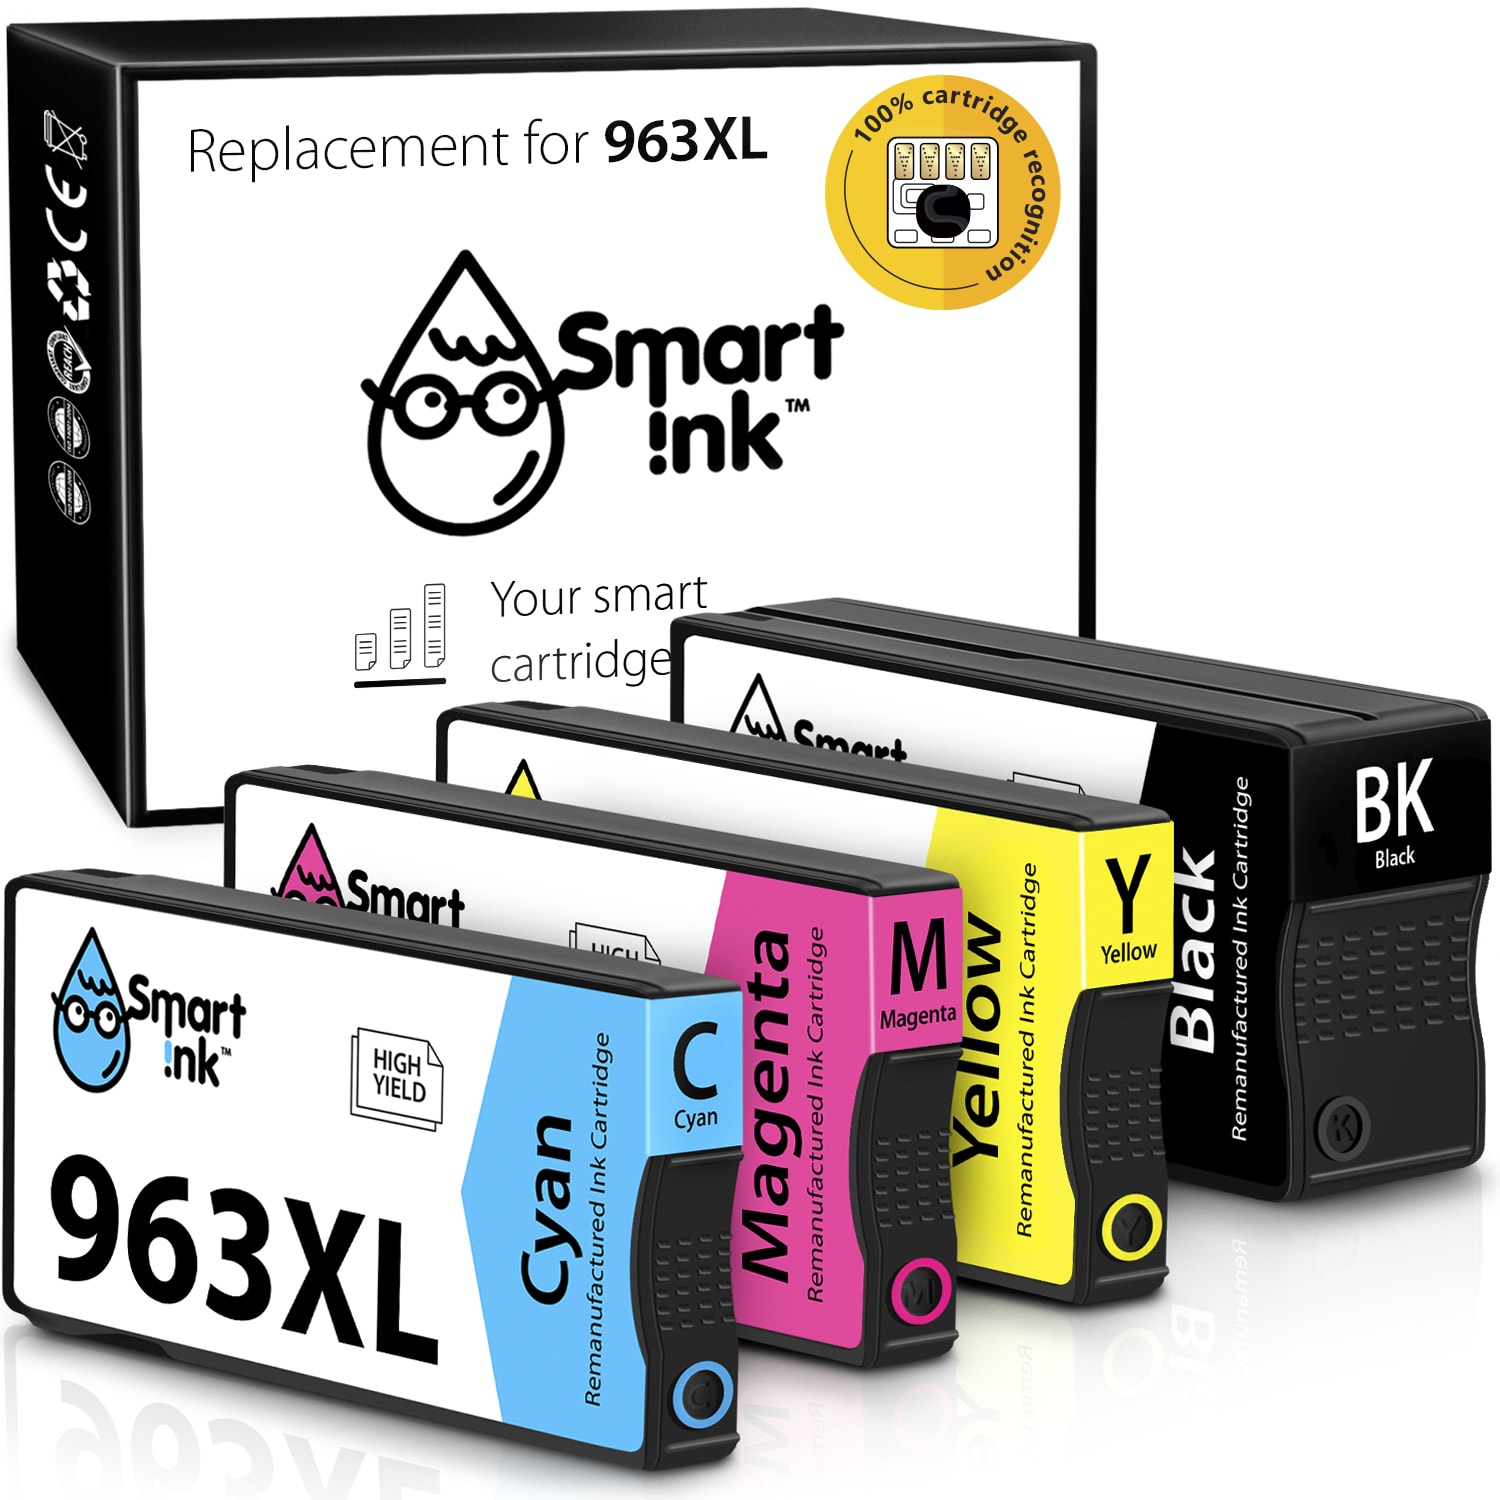 HP 963 XL (4 Pack) Ink Cartridge Replacement - Buy Printer Cartridges in EU  at the best price